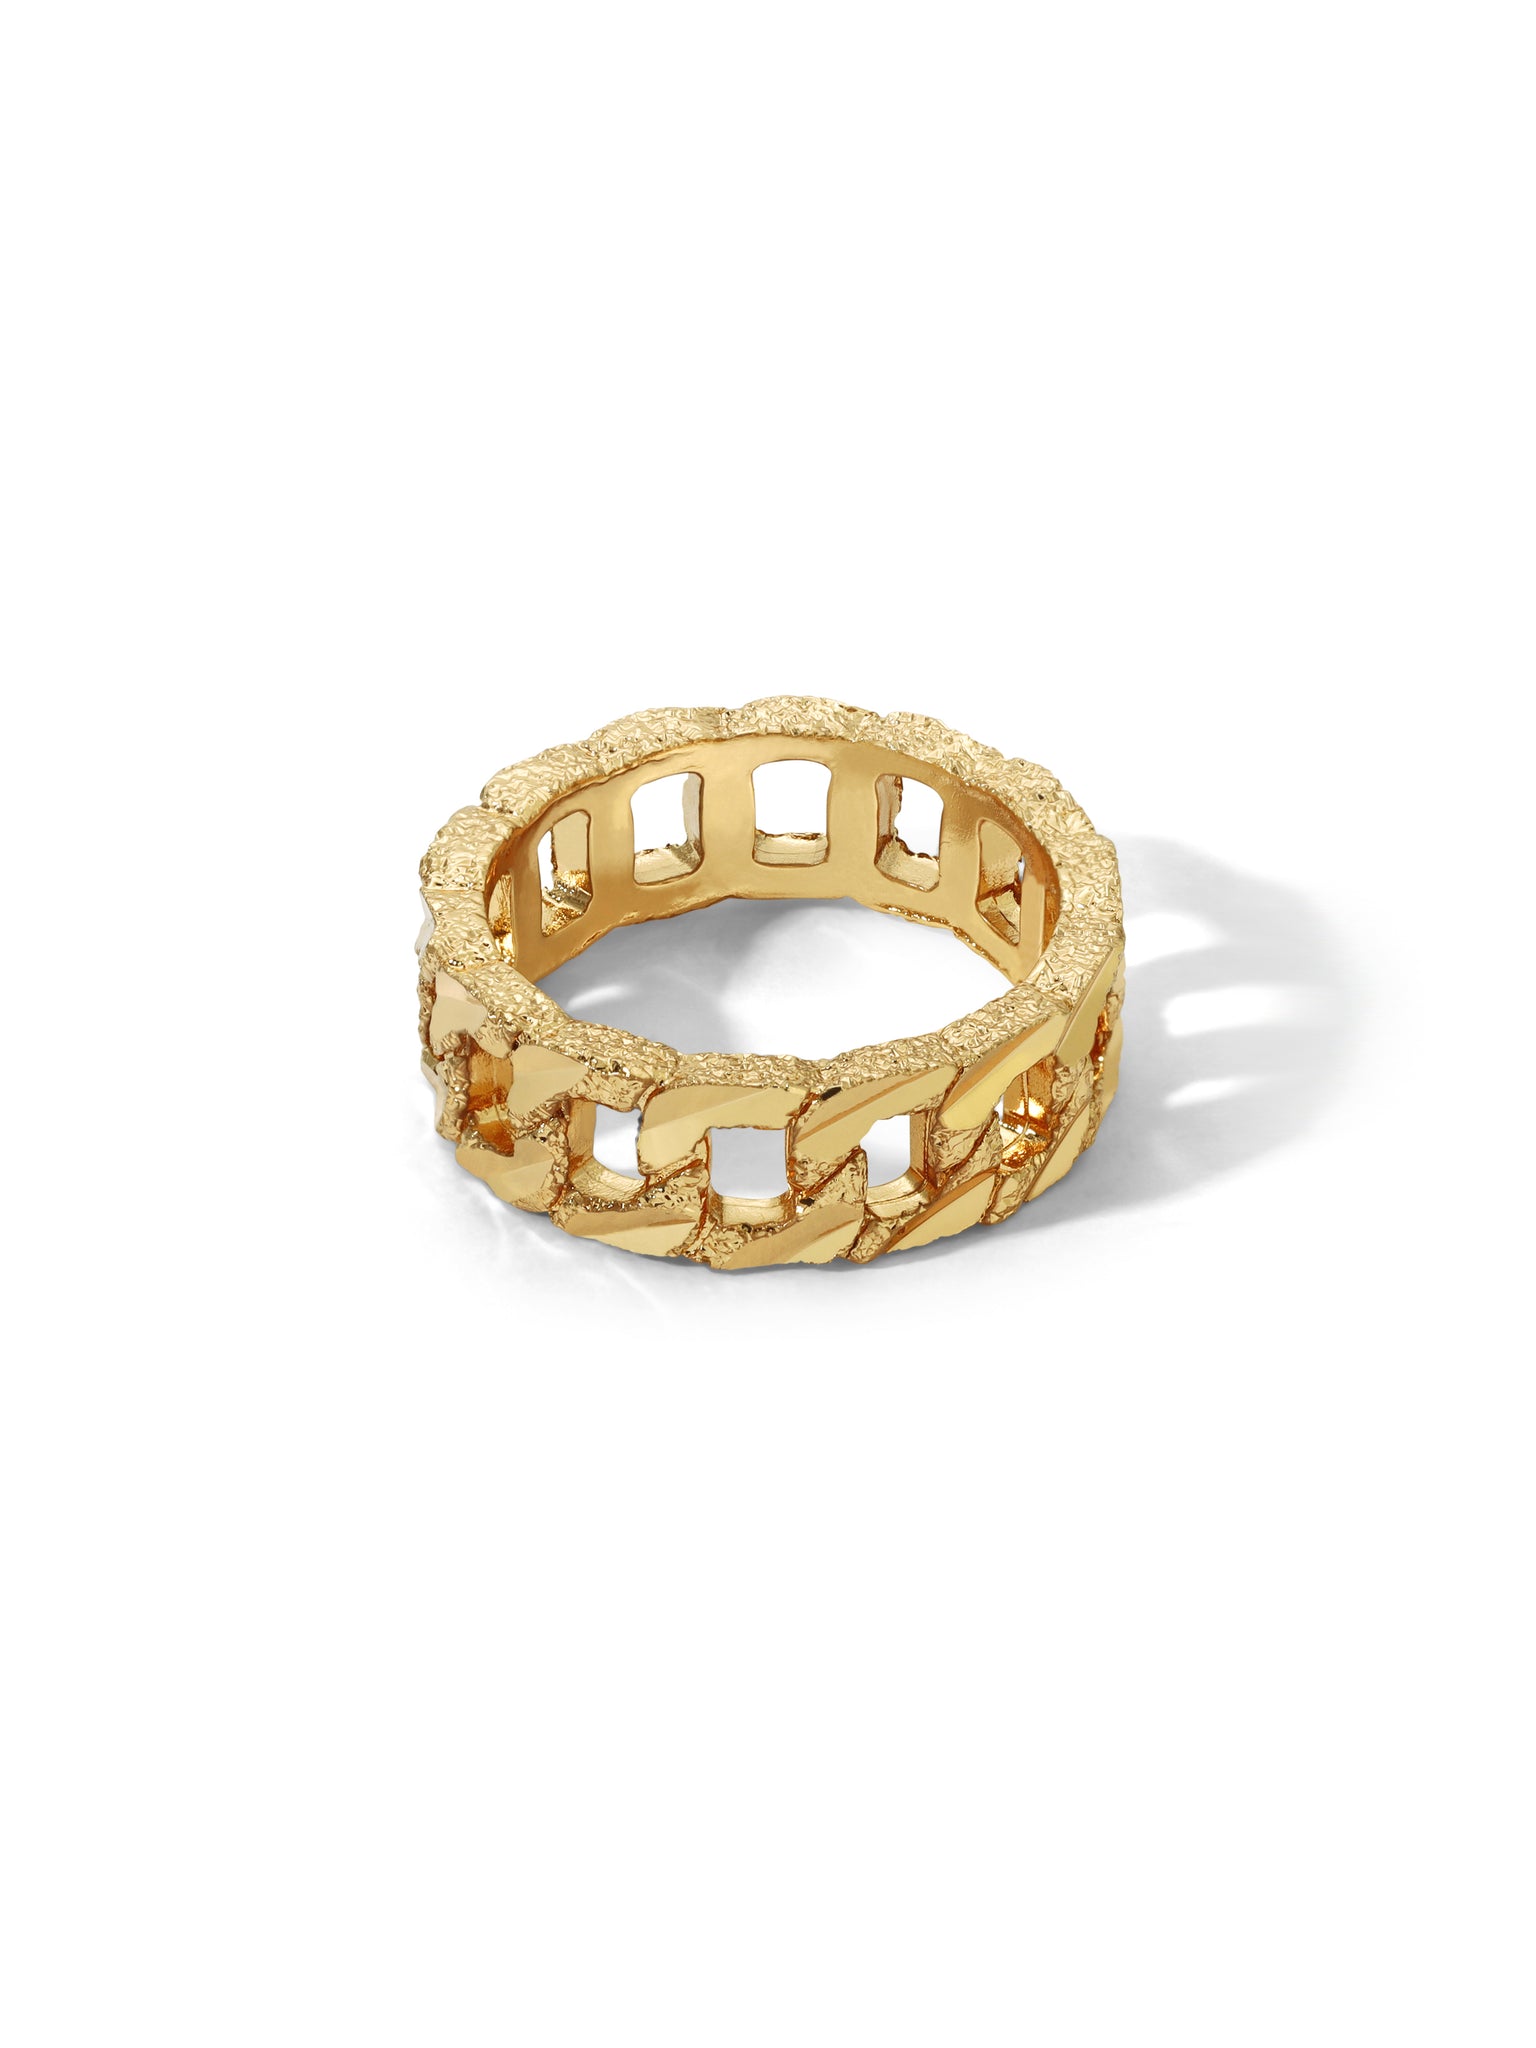 1.00CTW 14K Yellow Gold Mined diamond Chain Link Ring | The Ring Austin |  Round Rock, TX